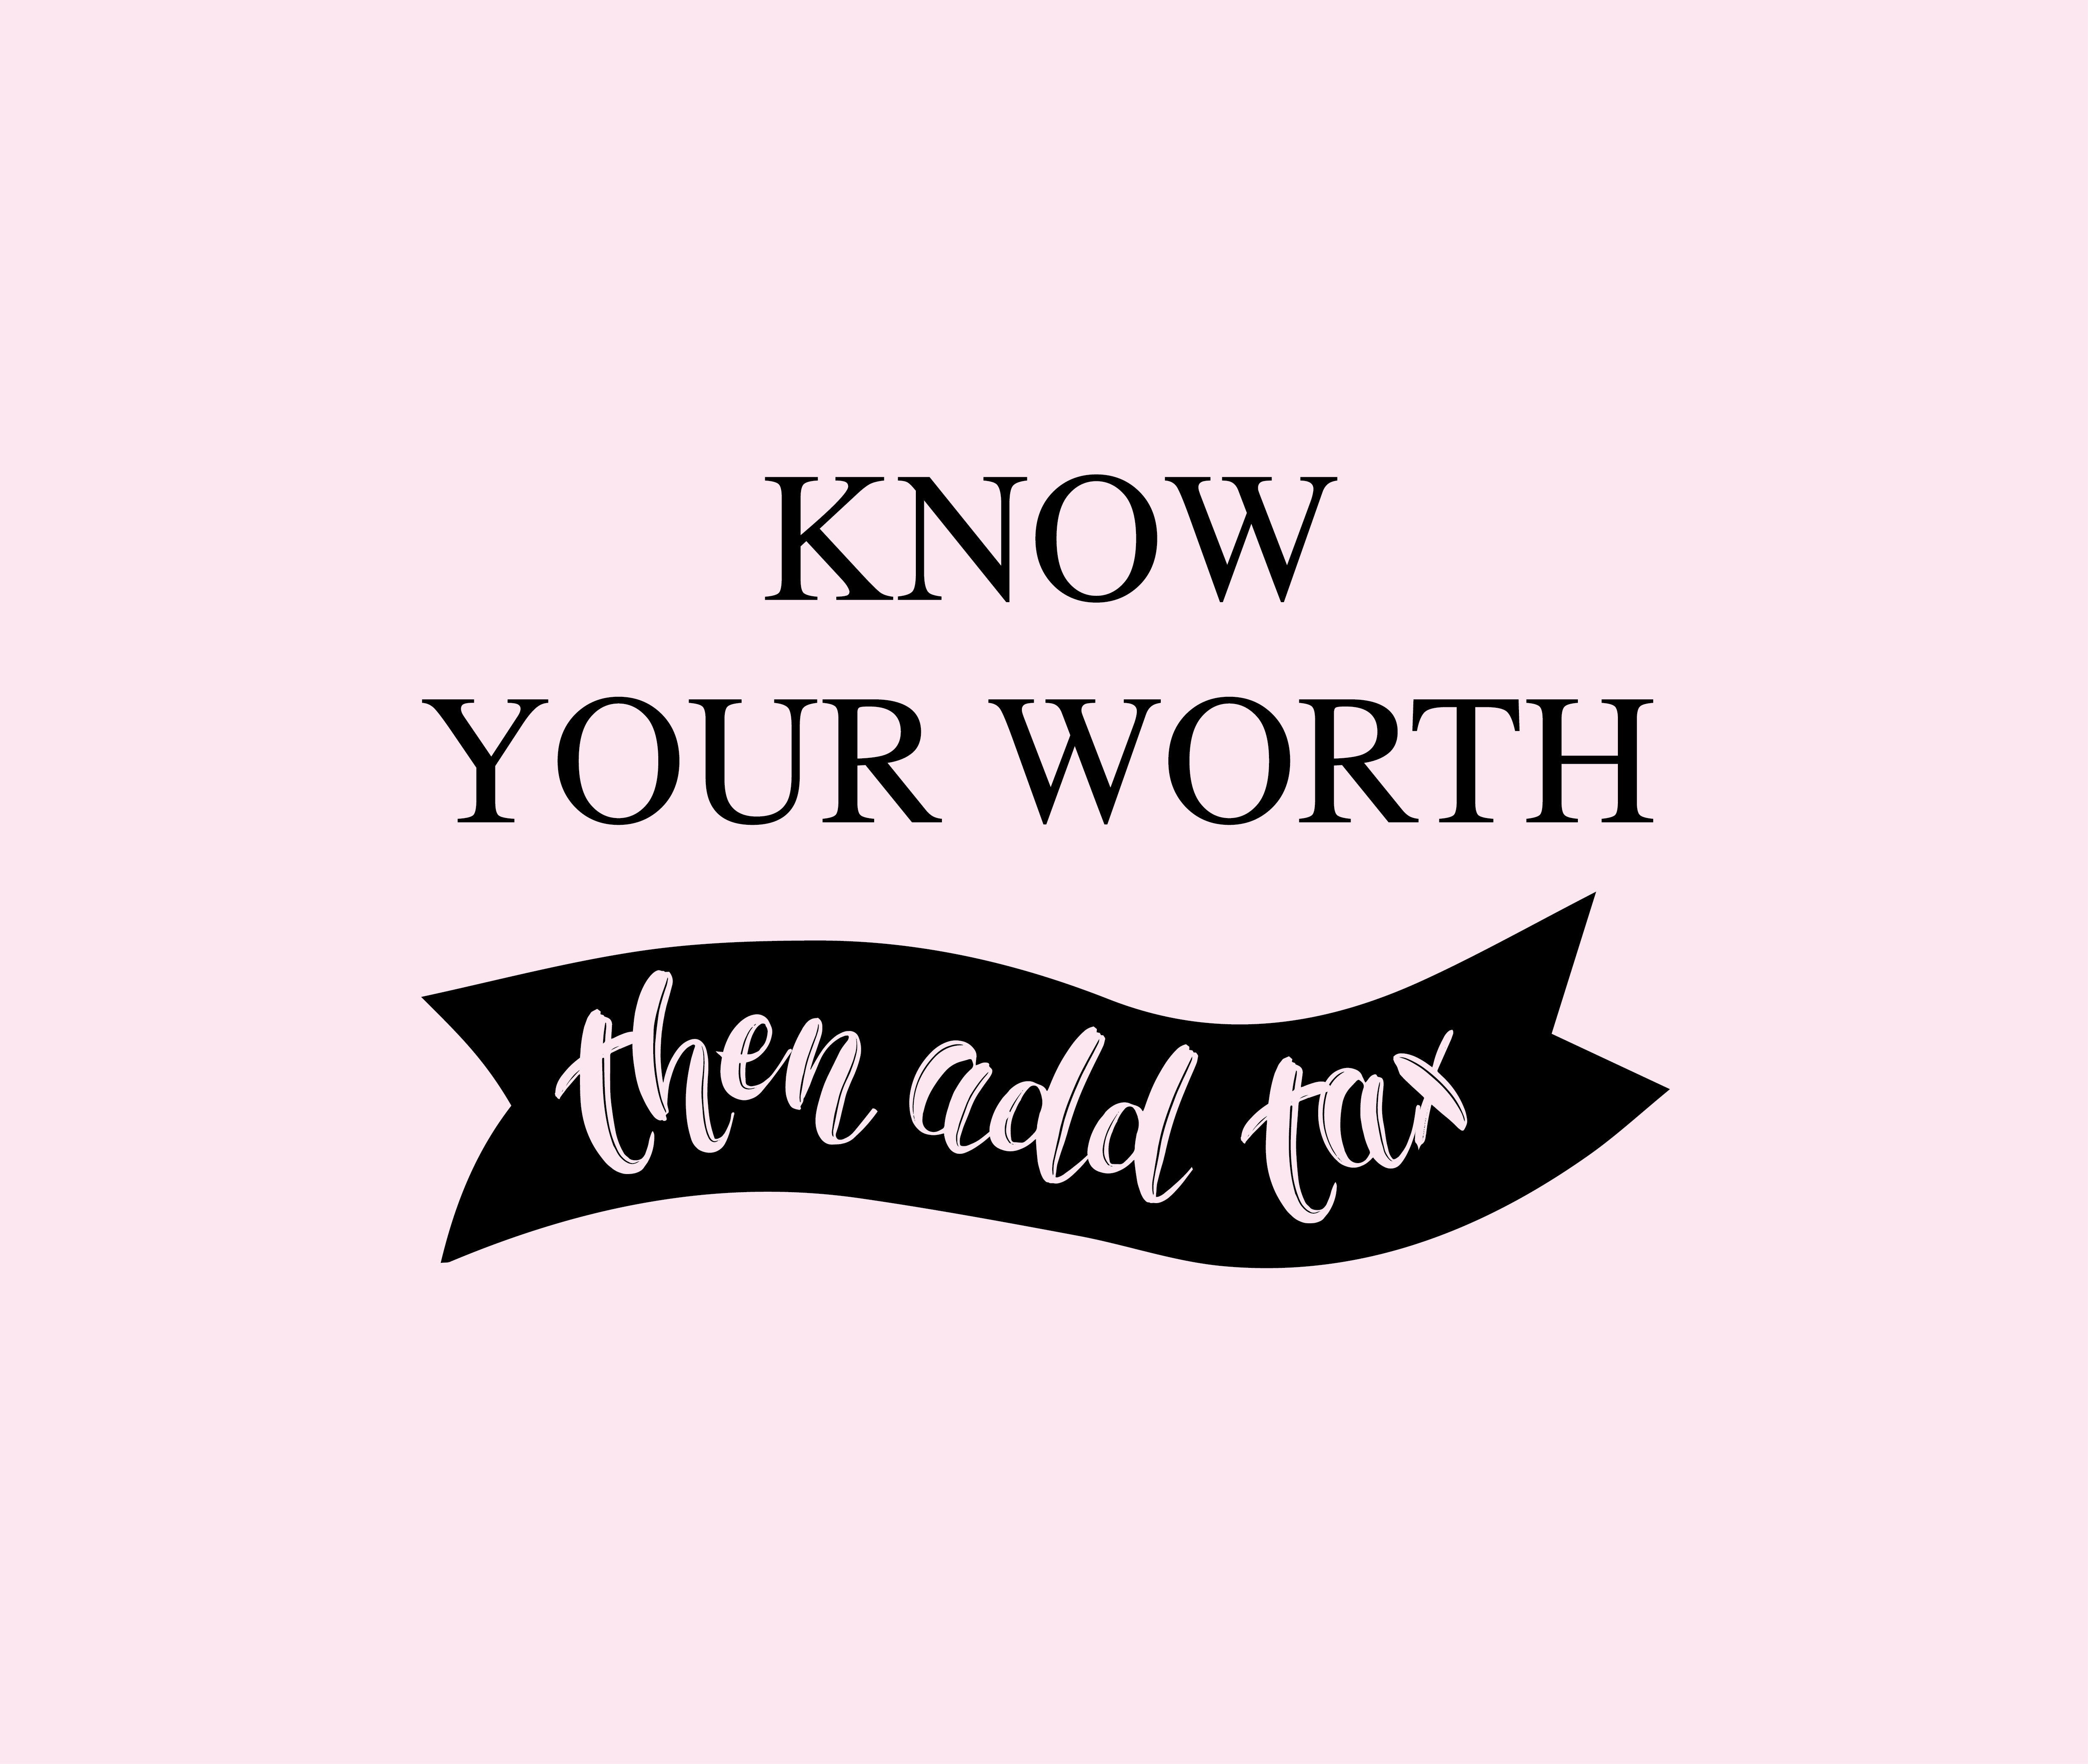 Know your worth then add tax quote